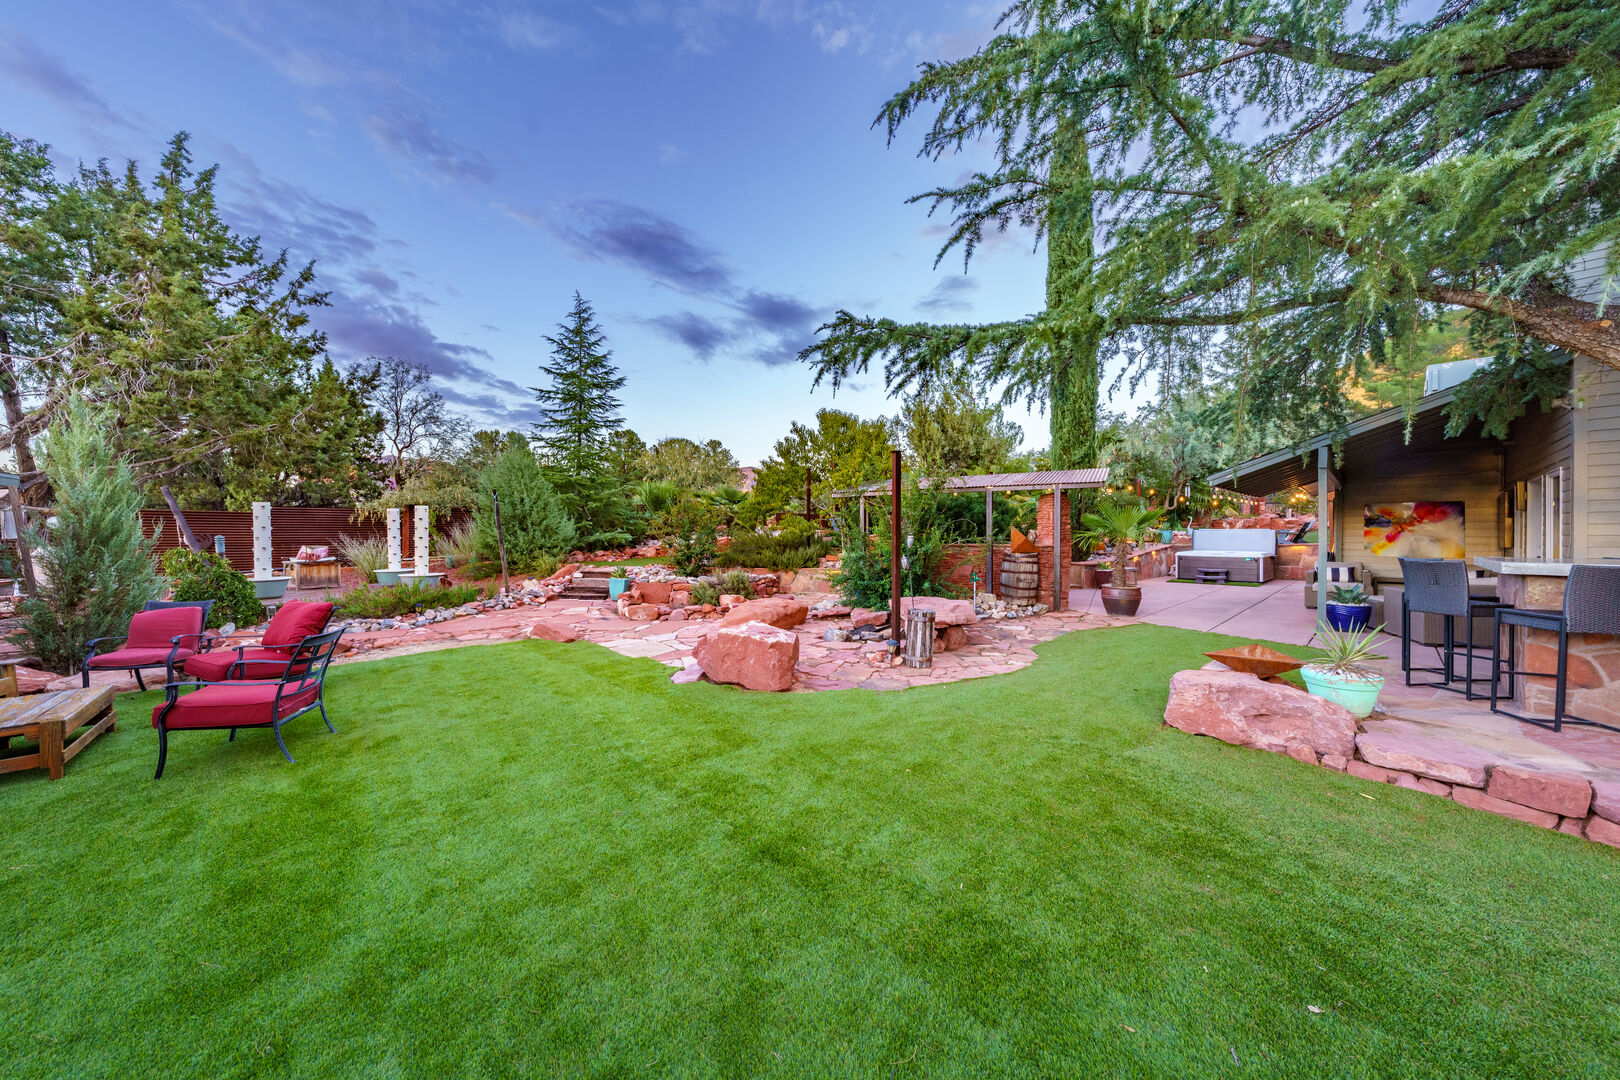 Plenty Of Room In This Amazing Landscaped Oasis